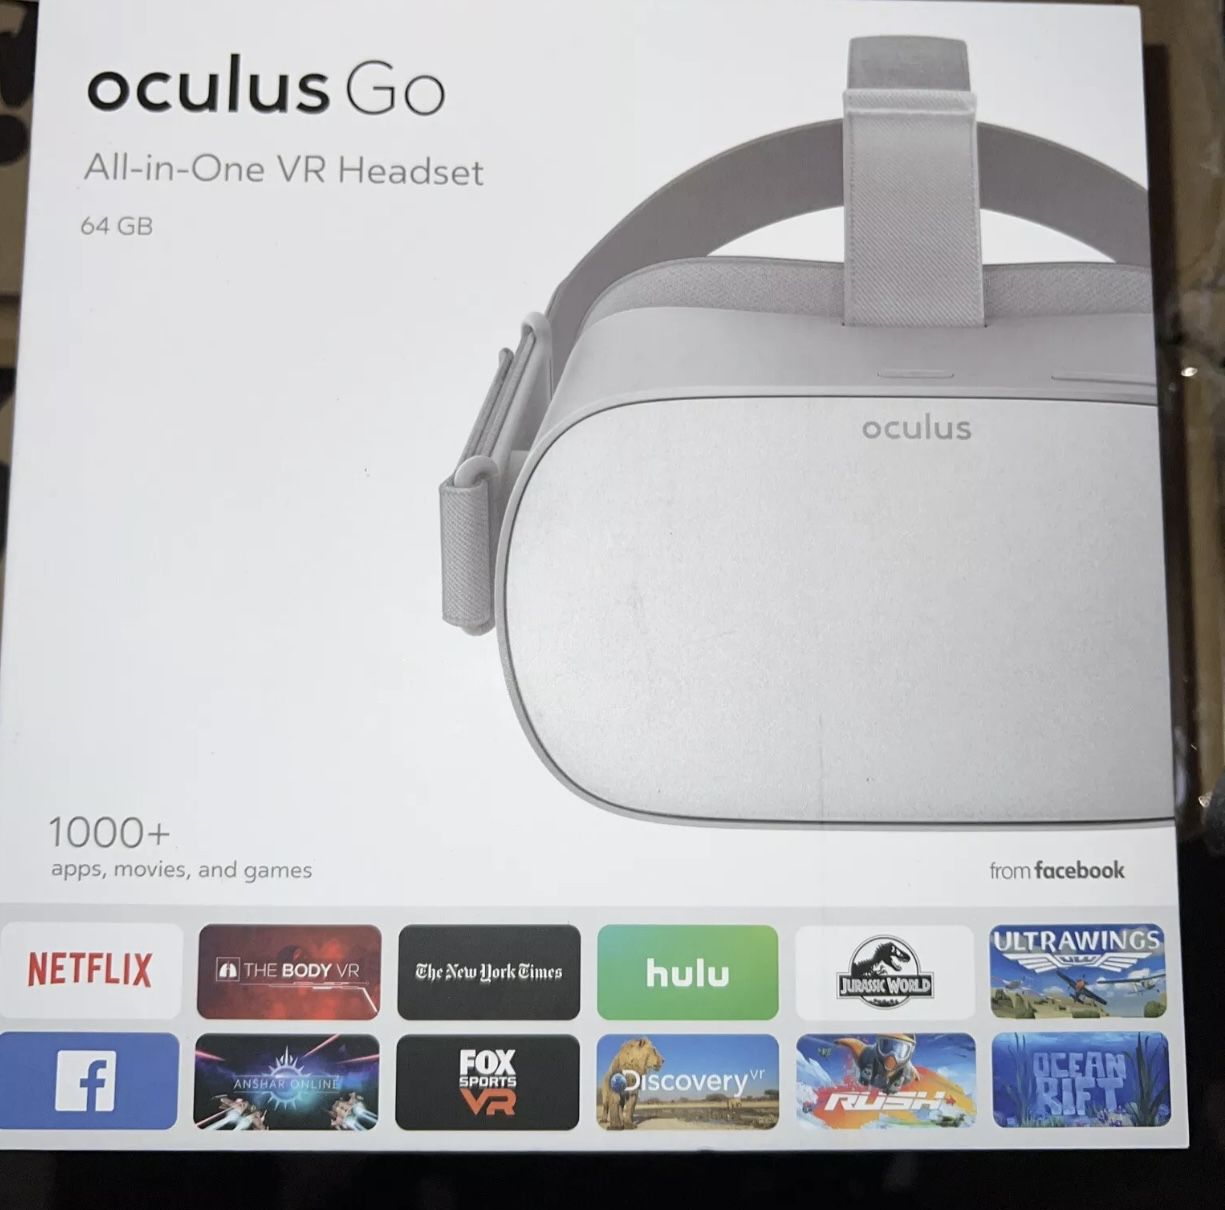 Oculus Go All in One Virtual Reality VR Headset 64GB From Facebook. To Play Games, Watch Movies, Videos Etc.